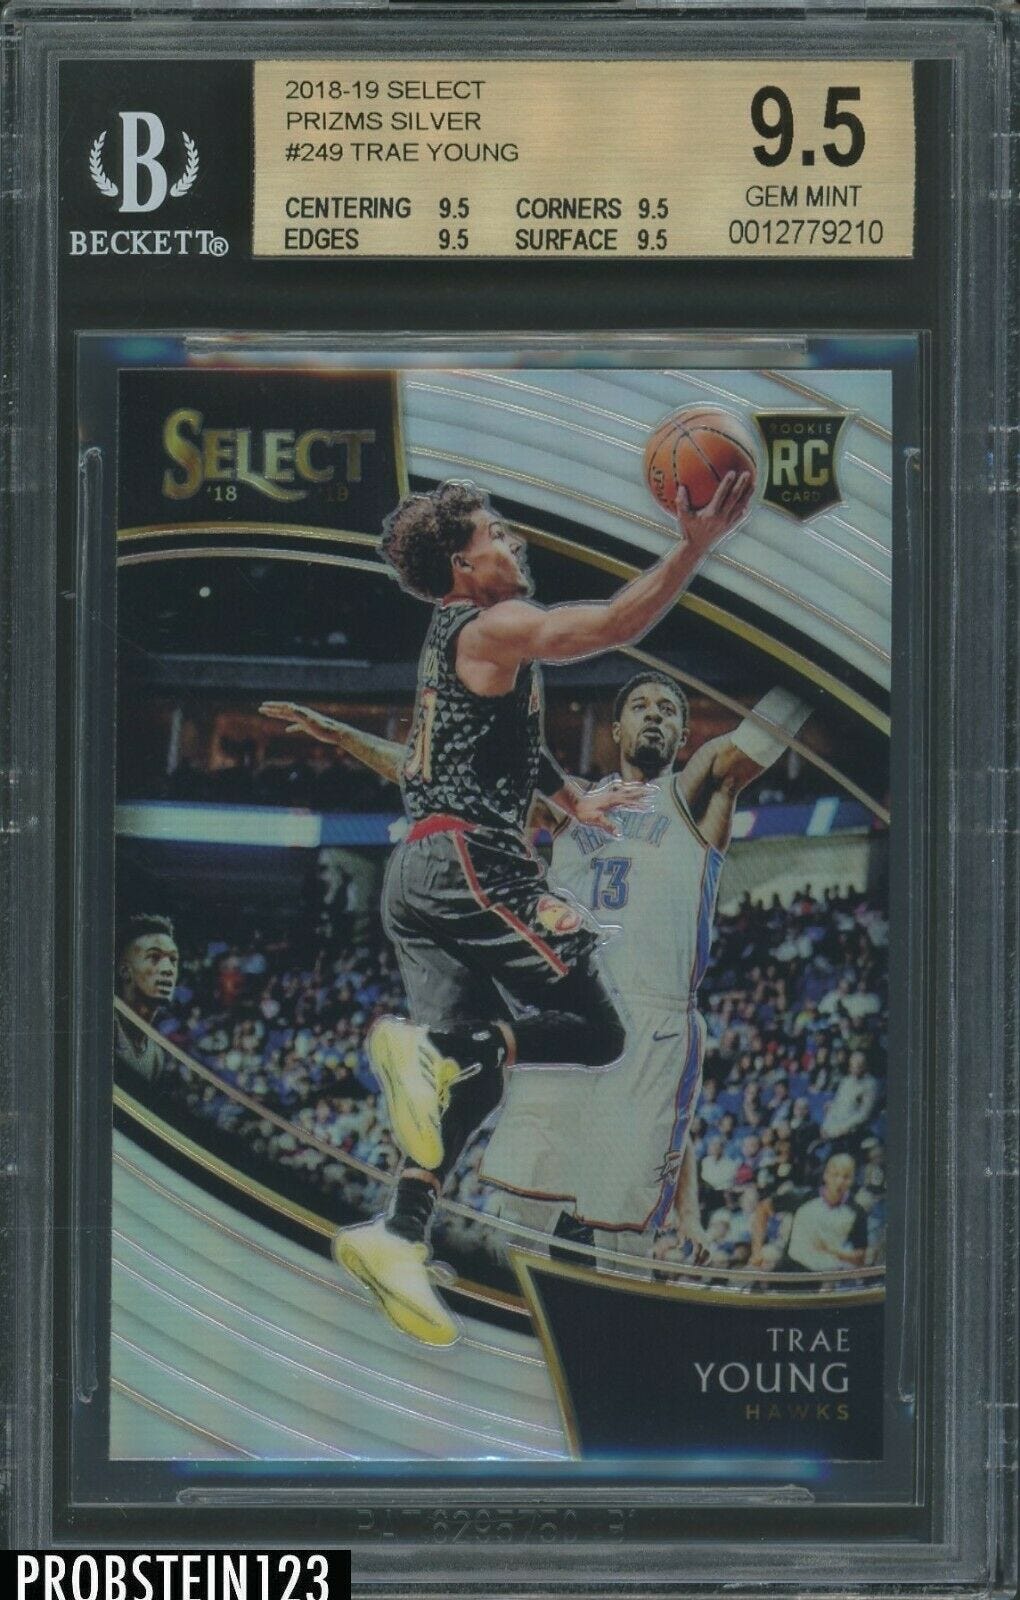 Image 1 - 2018-19-Select-Silver-Prizm-Courtside-249-Trae-Young-RC-Rookie-BGS-9-5-GEM-MINT